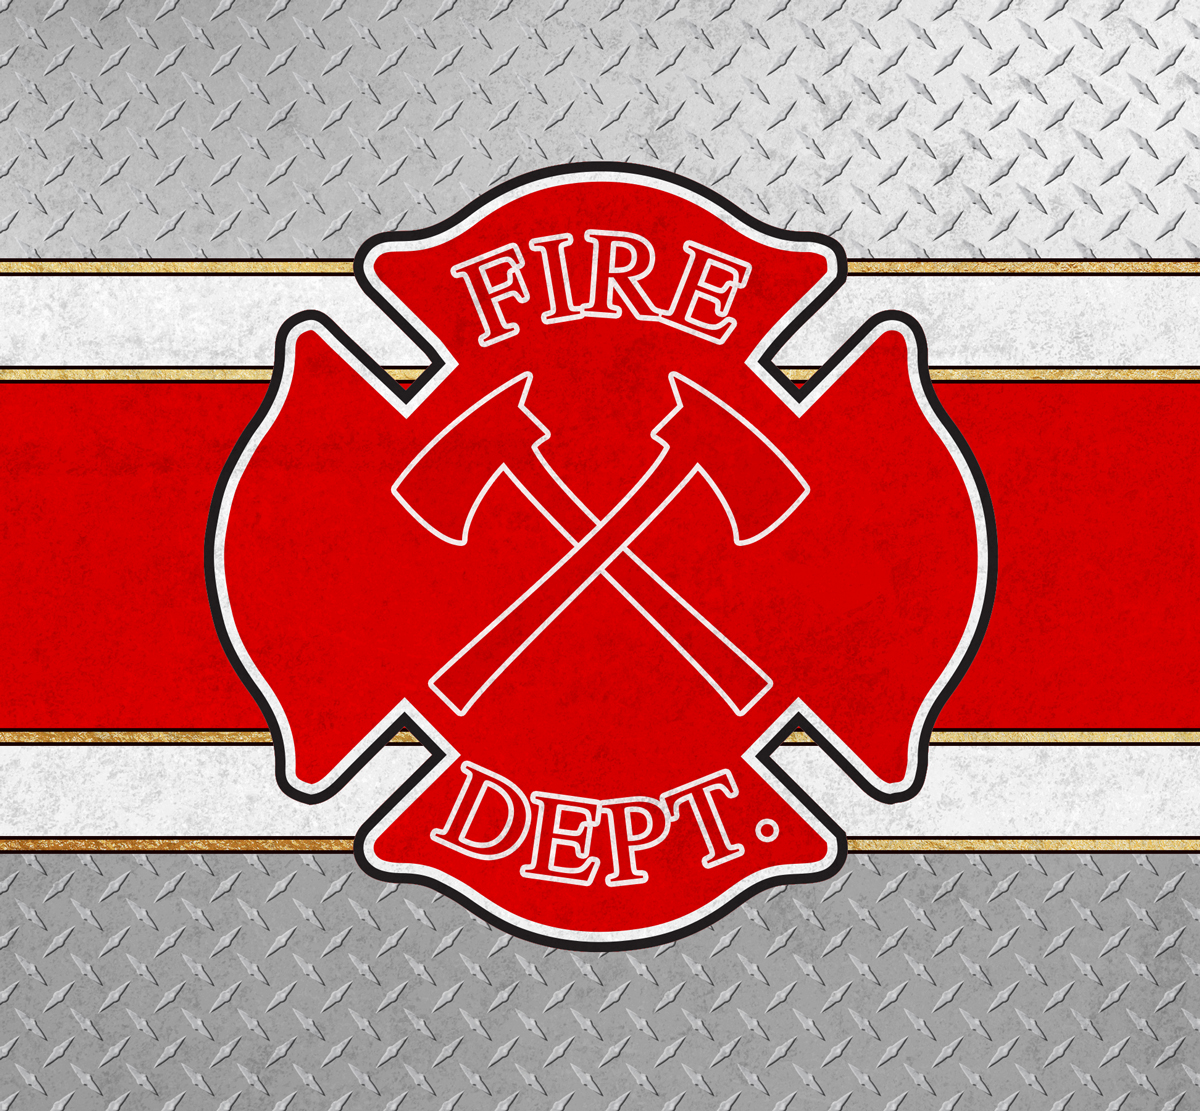 Fire Department | FireHitch.com | Wear Your Pride on Your Ride